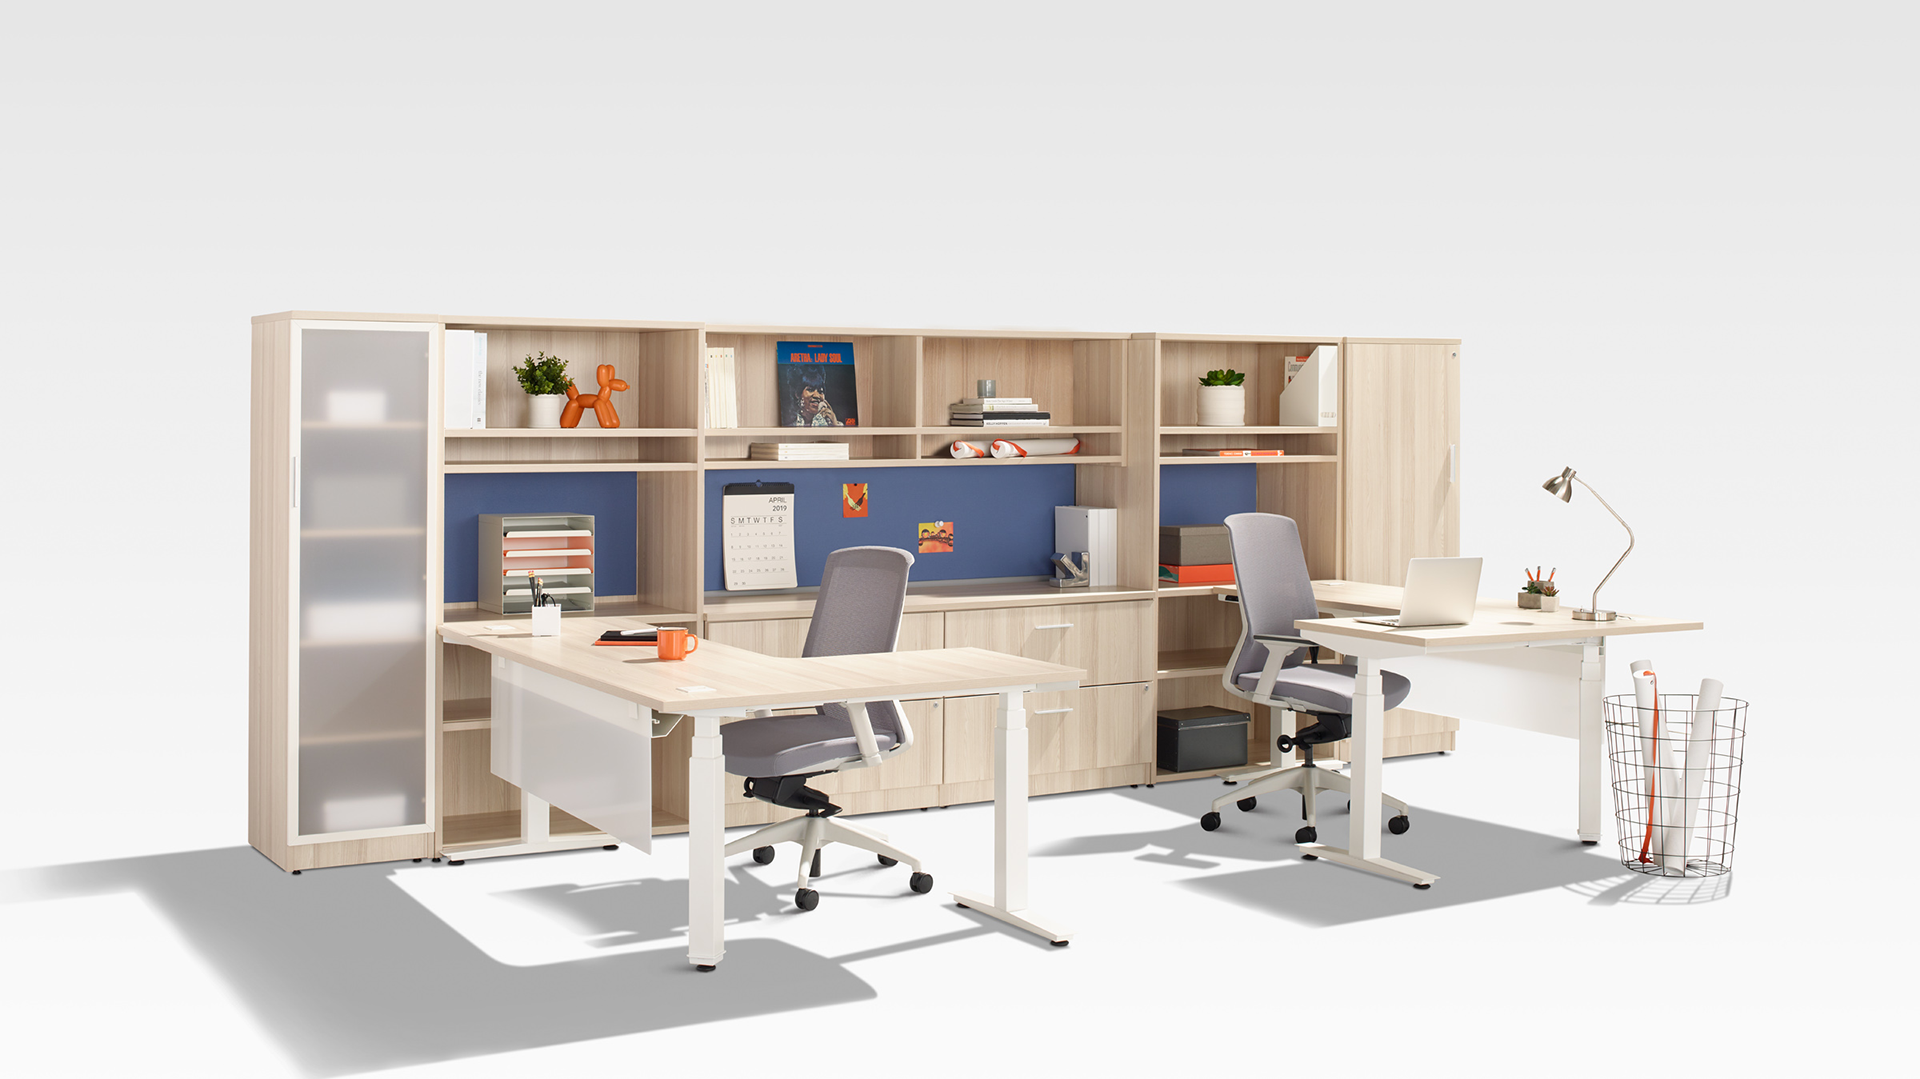 <h1>Storage options for the modern office environment</h1>